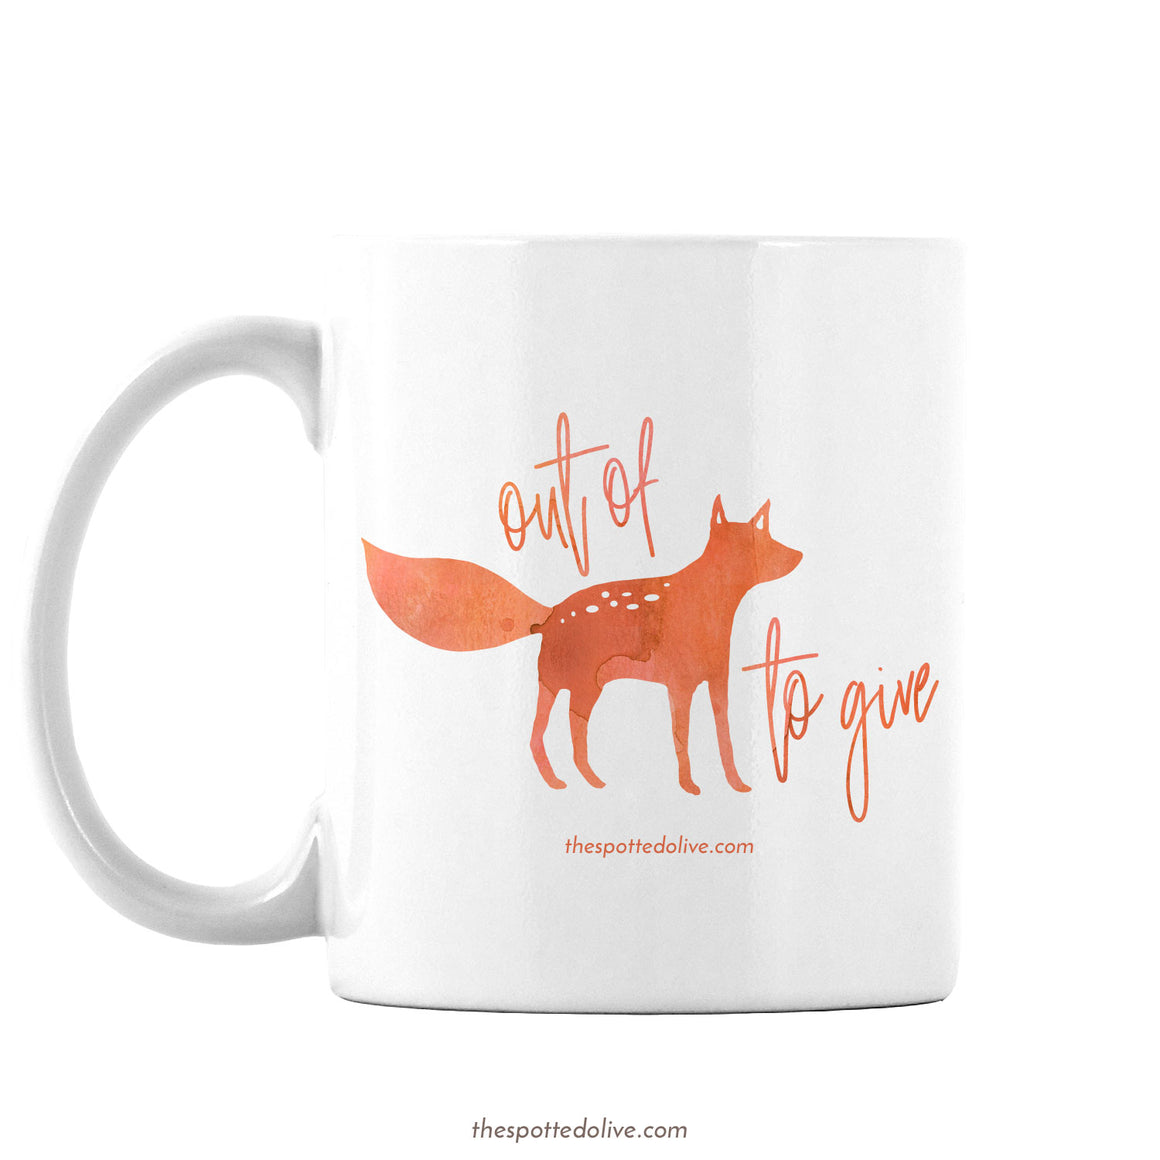 Funny Out of Fox to Give Coffee Mug by The Spotted Olive - Left